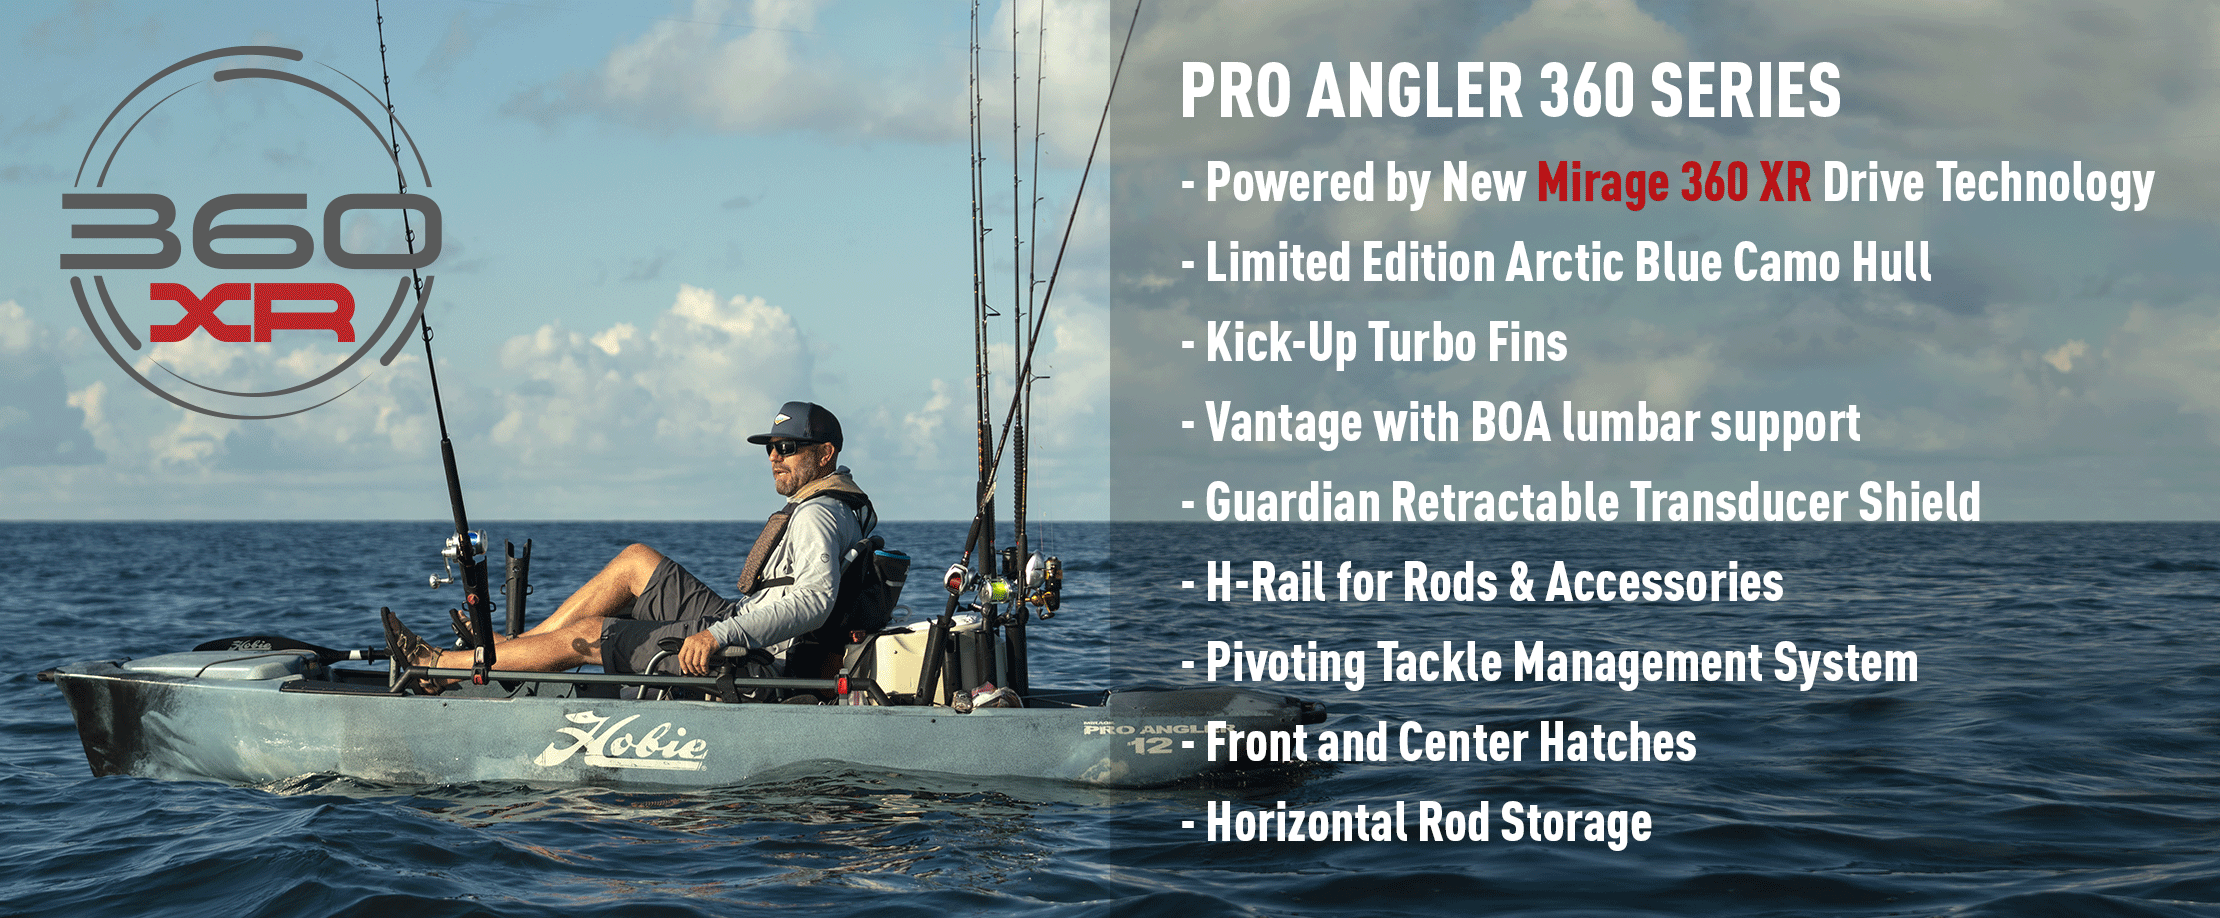 Mirage Pro Angler 14 with 360XR Drive Technology